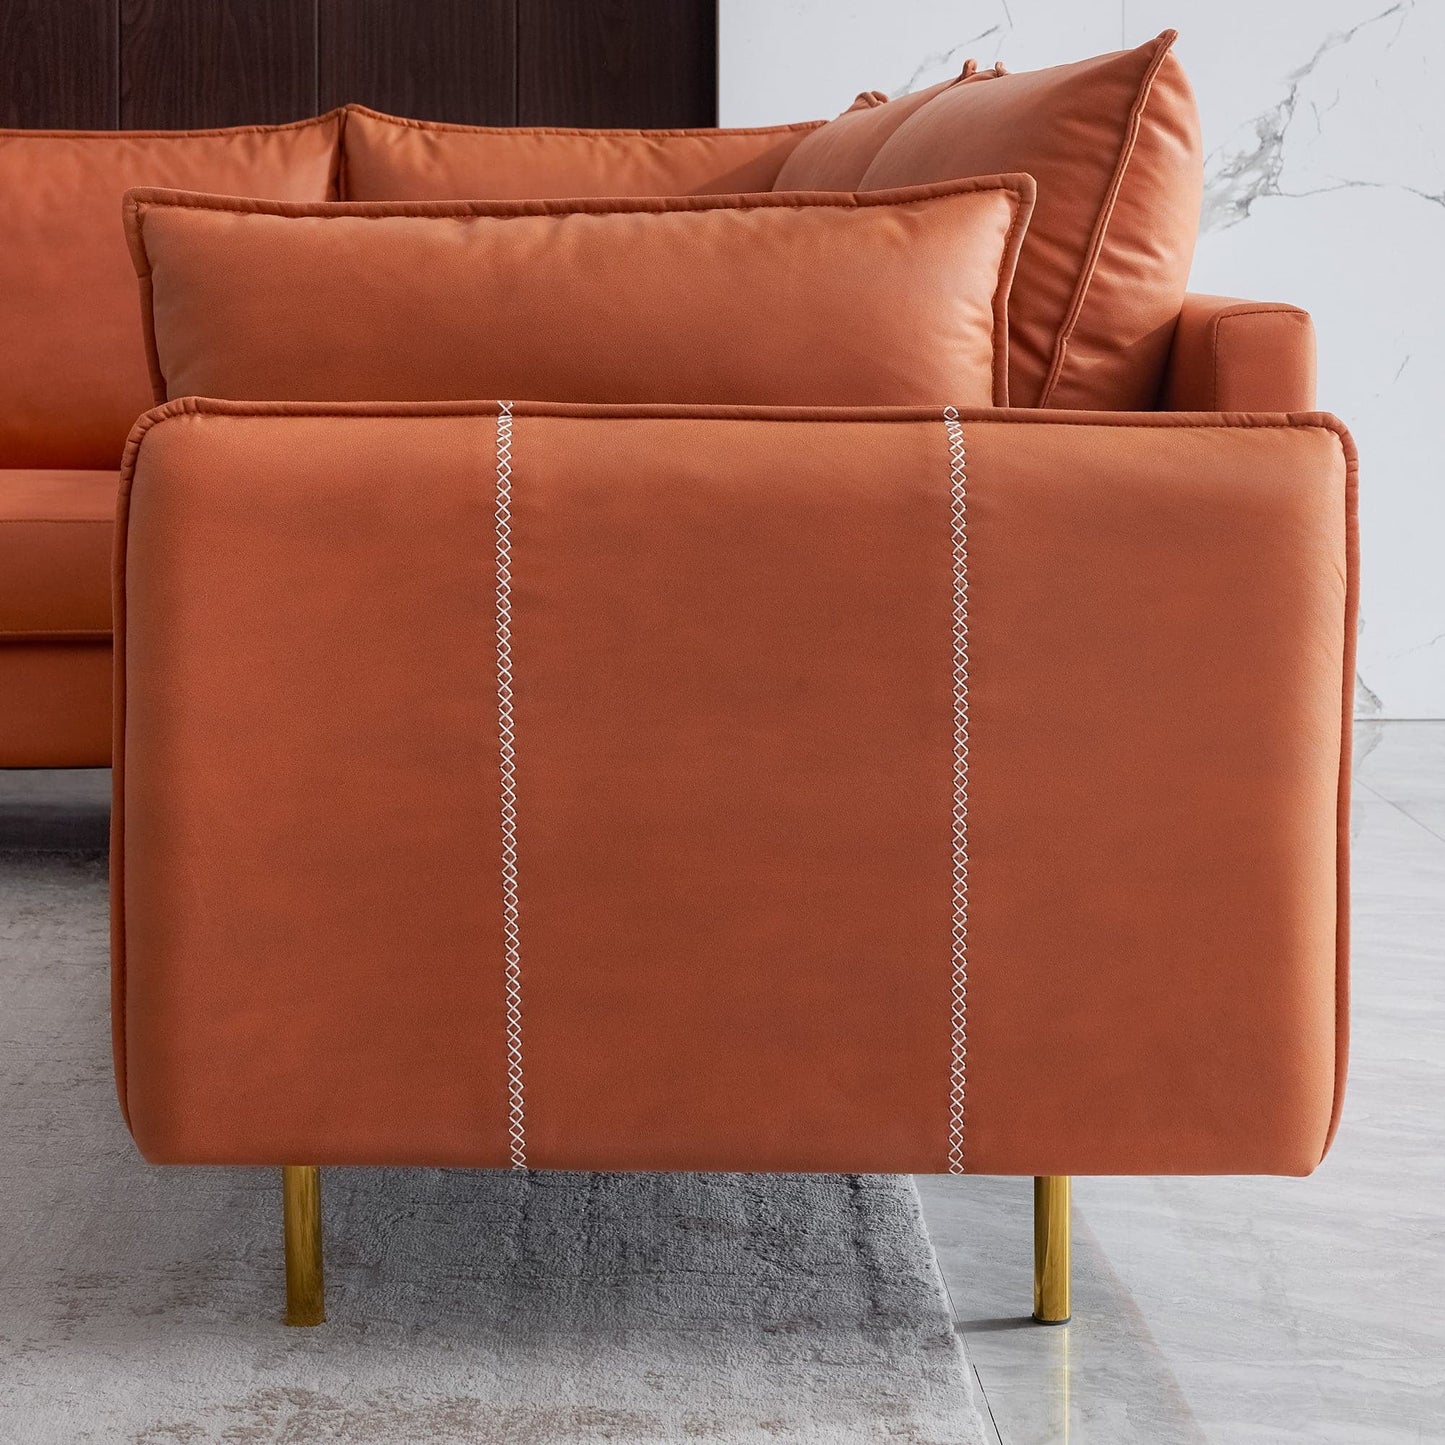 TFC&H Co. L-shaped Corner Sectional Technical leather Sofa - Orange- Ships from The US - sectional at TFC&H Co.